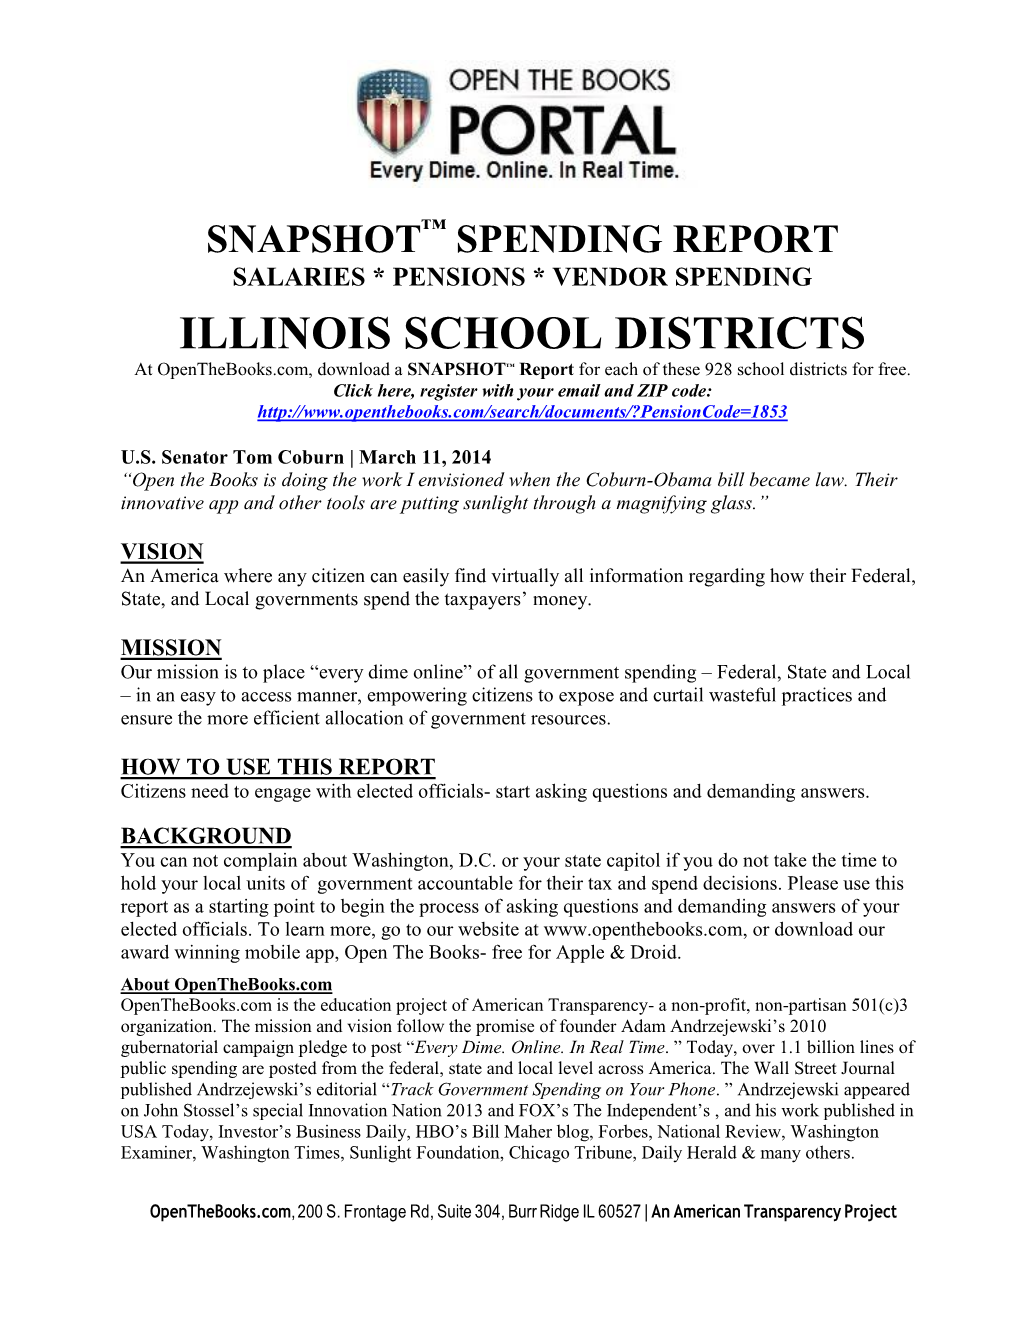 ILLINOIS SCHOOL DISTRICTS at Openthebooks.Com, Download a SNAPSHOT™ Report for Each of These 928 School Districts for Free